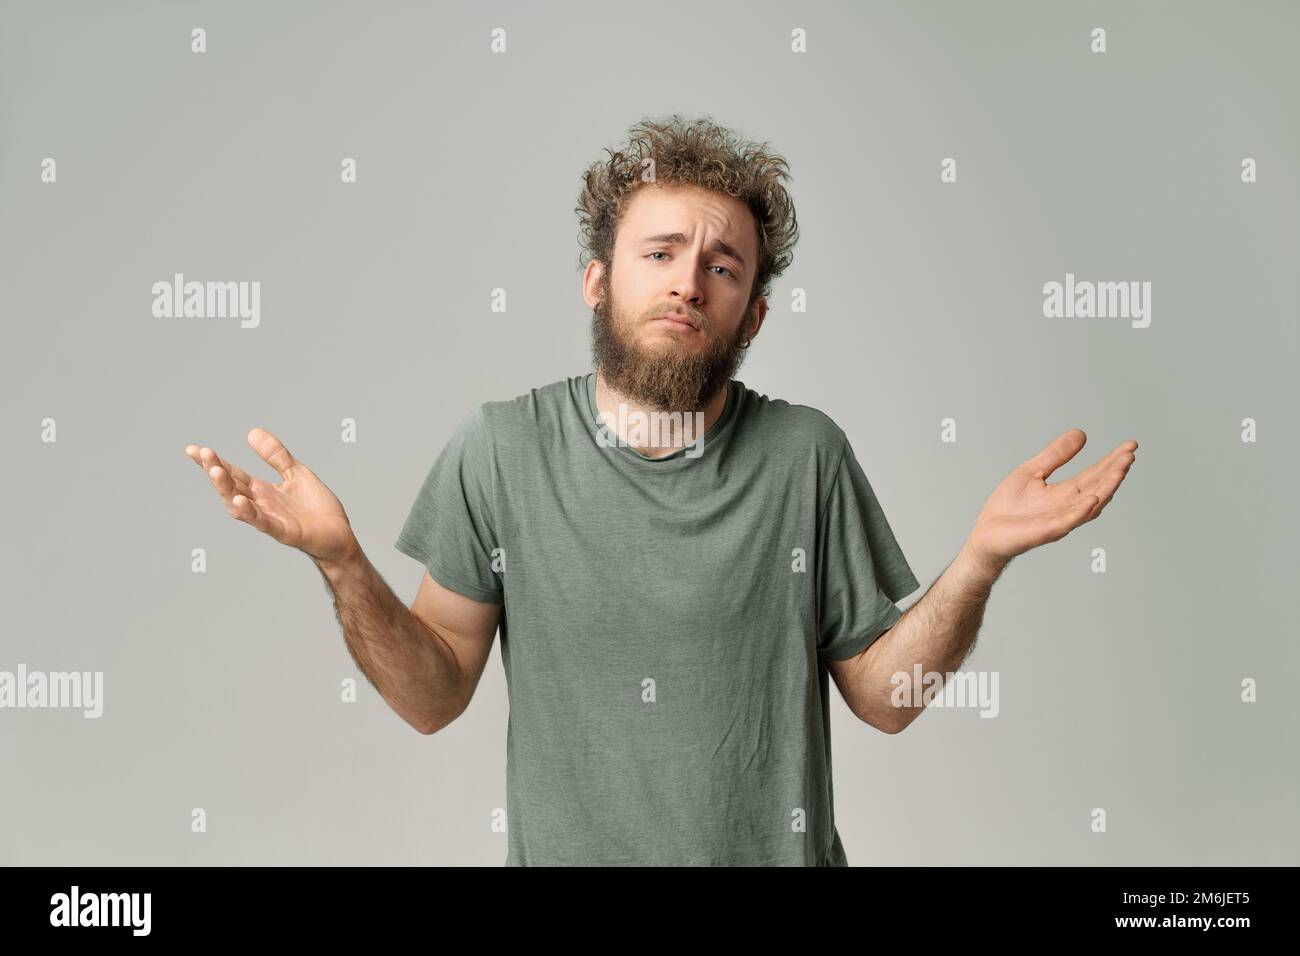 Gesturing I DONT KNOW or I AM SORRY young handsome bearded wild curly hair man with bright blue eyes isolated on grey background Stock Photo